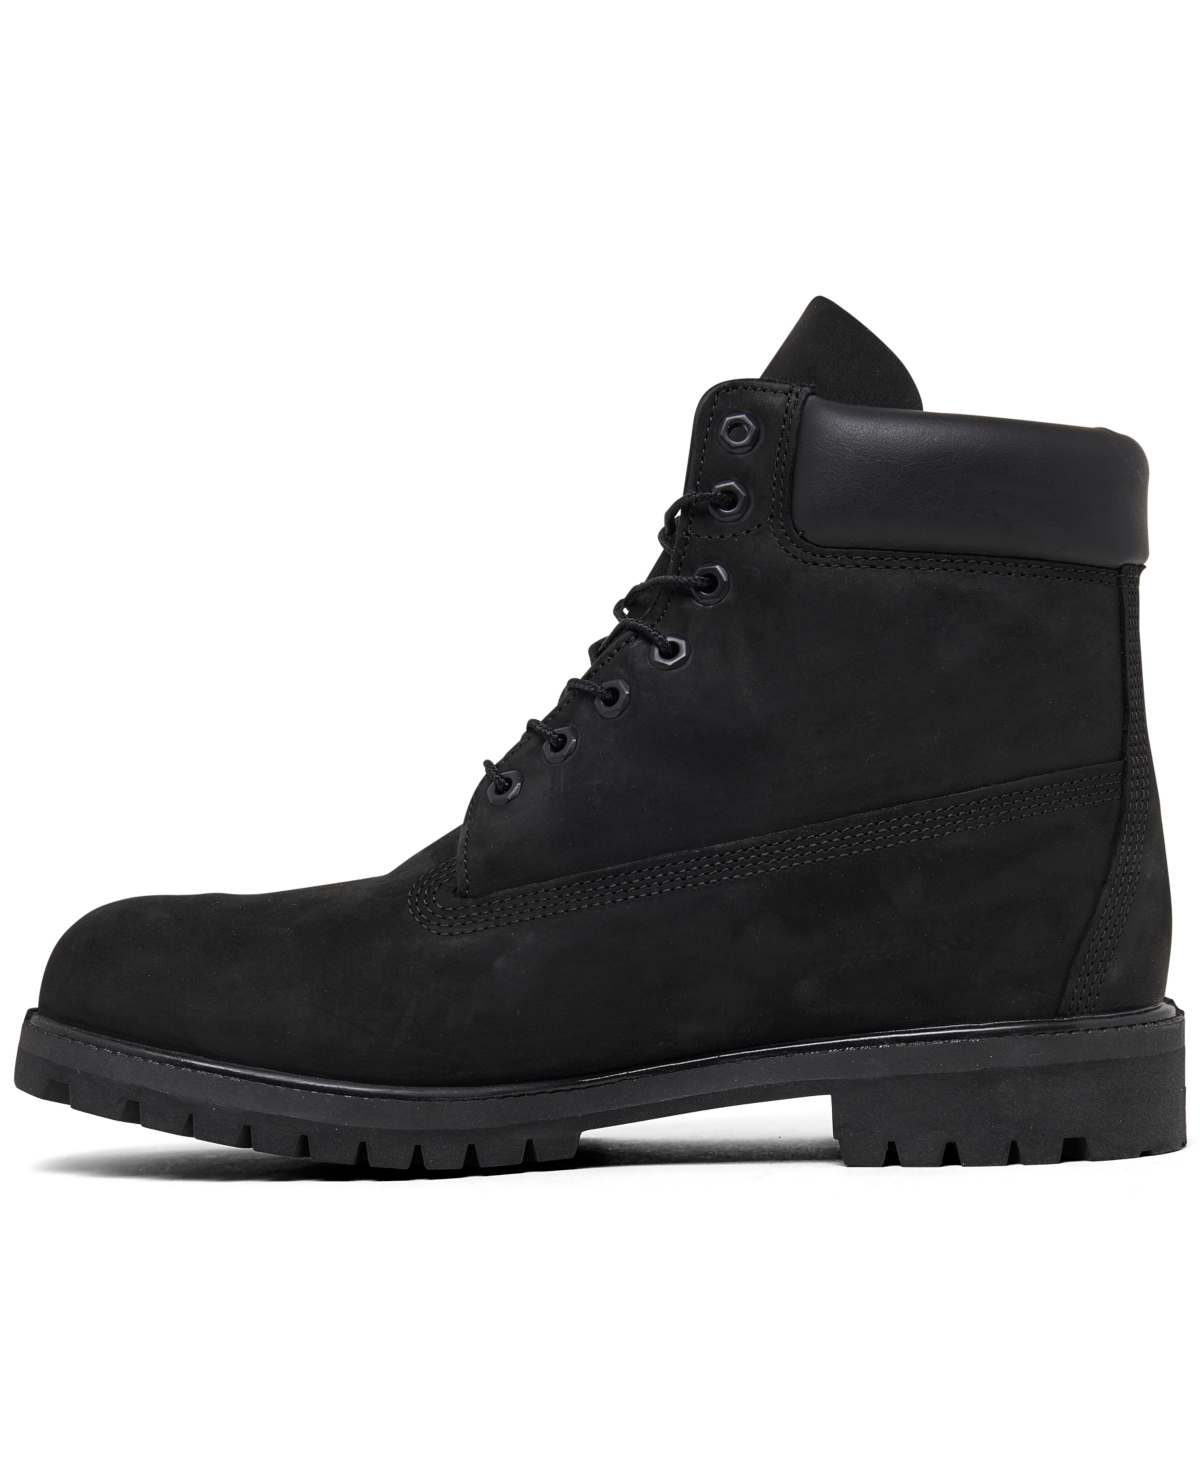 Shop Timberland Men's 6 Inch Premium Waterproof Boots From Finish Line In Black